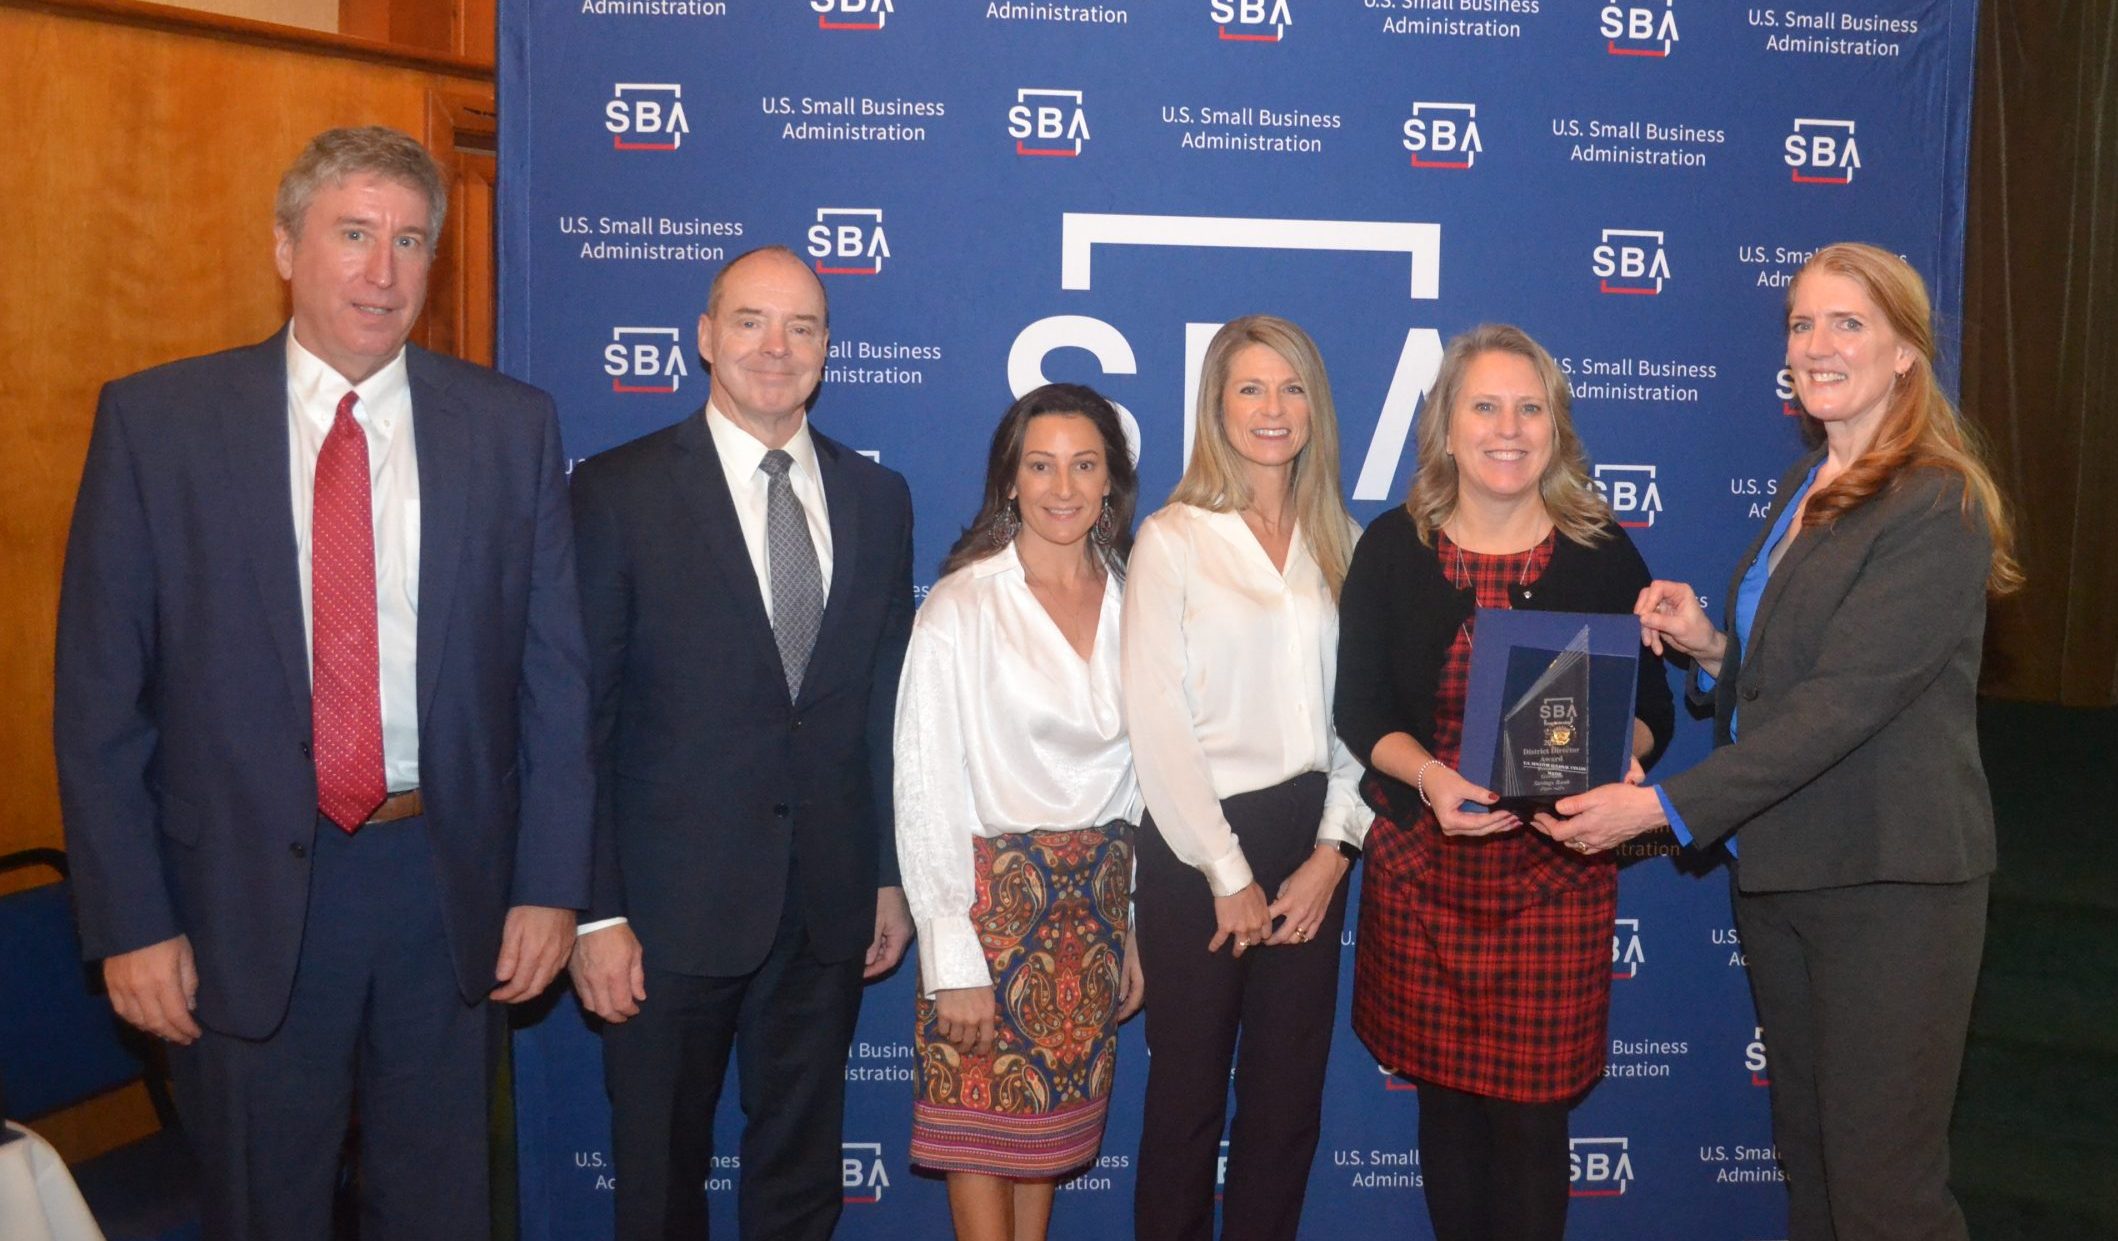 Six people standing in front of the SBA backdrop receiving an award.